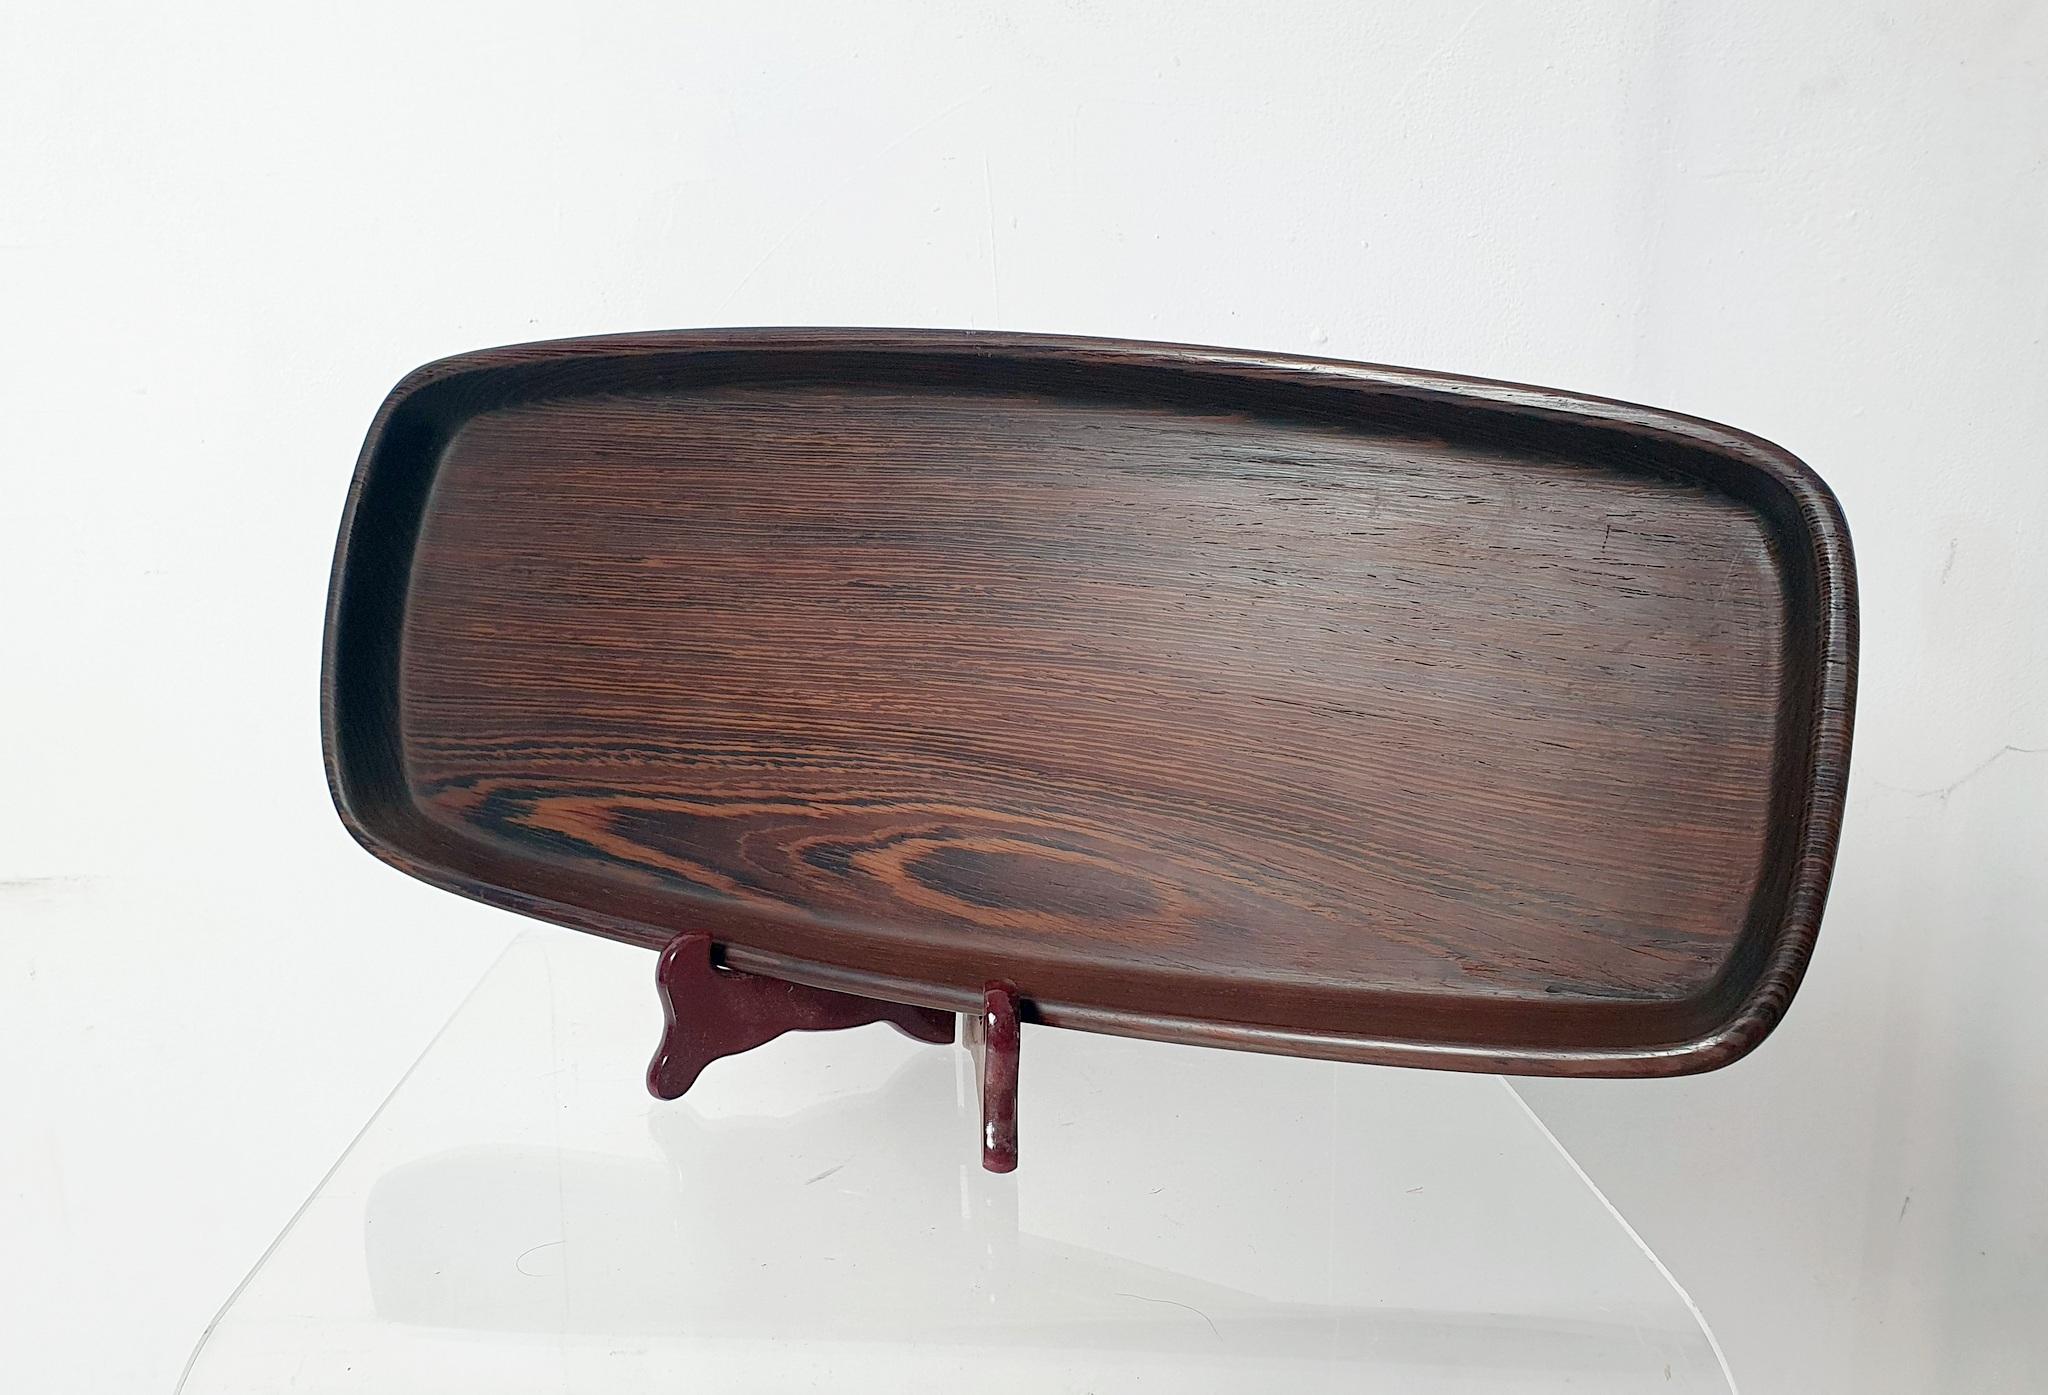 A lovely wooden tray by renowned by danish designer Hans Gustav Ehrenreich. The tray has a somewhat irregular shaped design with organic soft shapes where the material is shown to it's fullest. The condition is very nice and it is almost unused. The